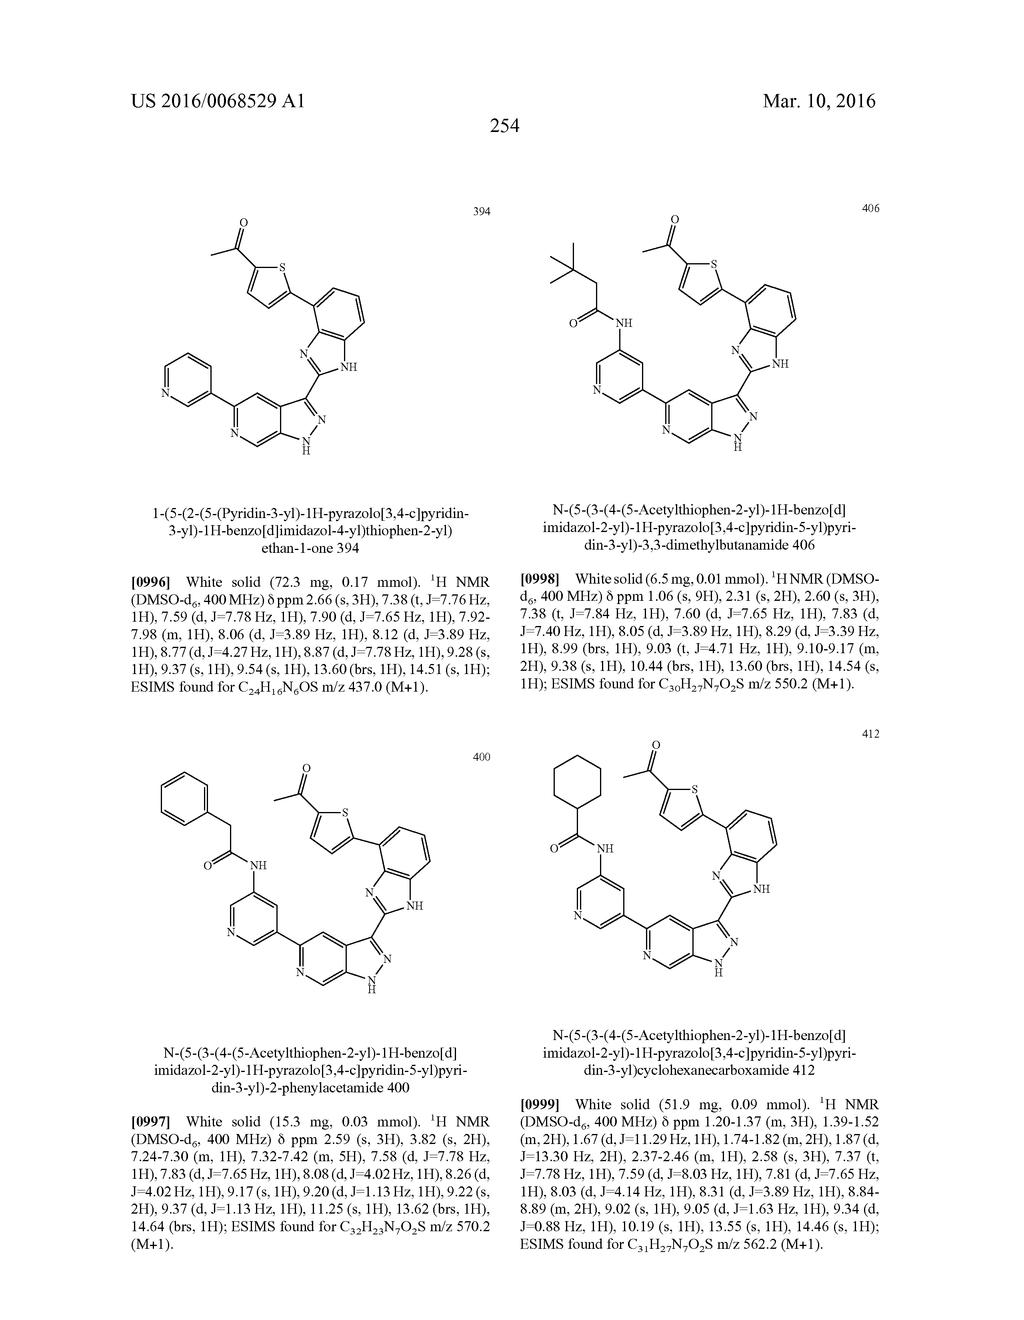 3-(1H-BENZO[D]IMIDAZOL-2-YL)-1H-PYRAZOLO[3,4-C]PYRIDINE AND THERAPEUTIC     USES THEREOF - diagram, schematic, and image 255